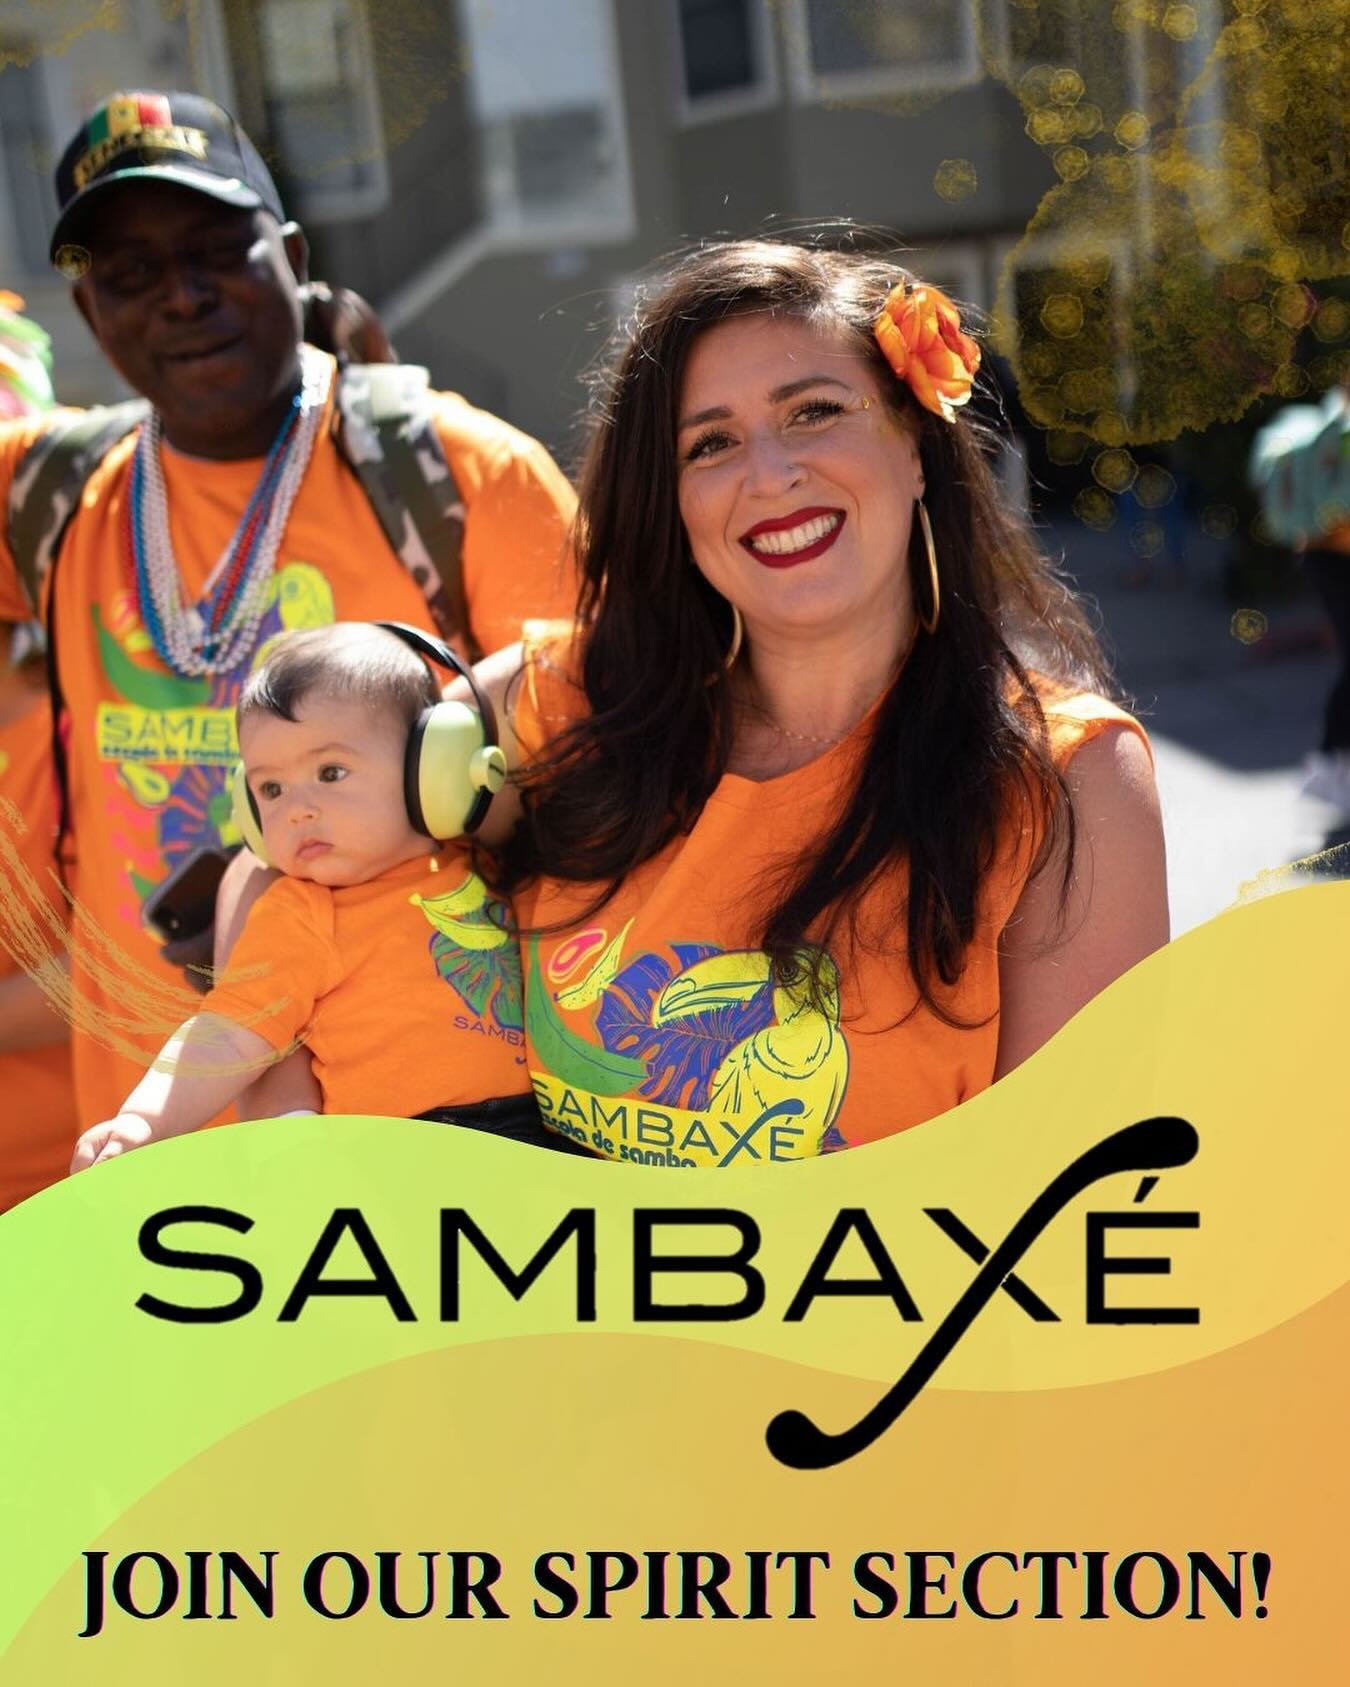 JOIN OUR SPIRIT SECTION✨

We&rsquo;d love you to join and enjoy the parade with our dancers! All are welcome to experience the joy of Brazilian music and dance. 

Families and kids are encouraged! 

REGISTER NOW 
Sambaxedancesf.com